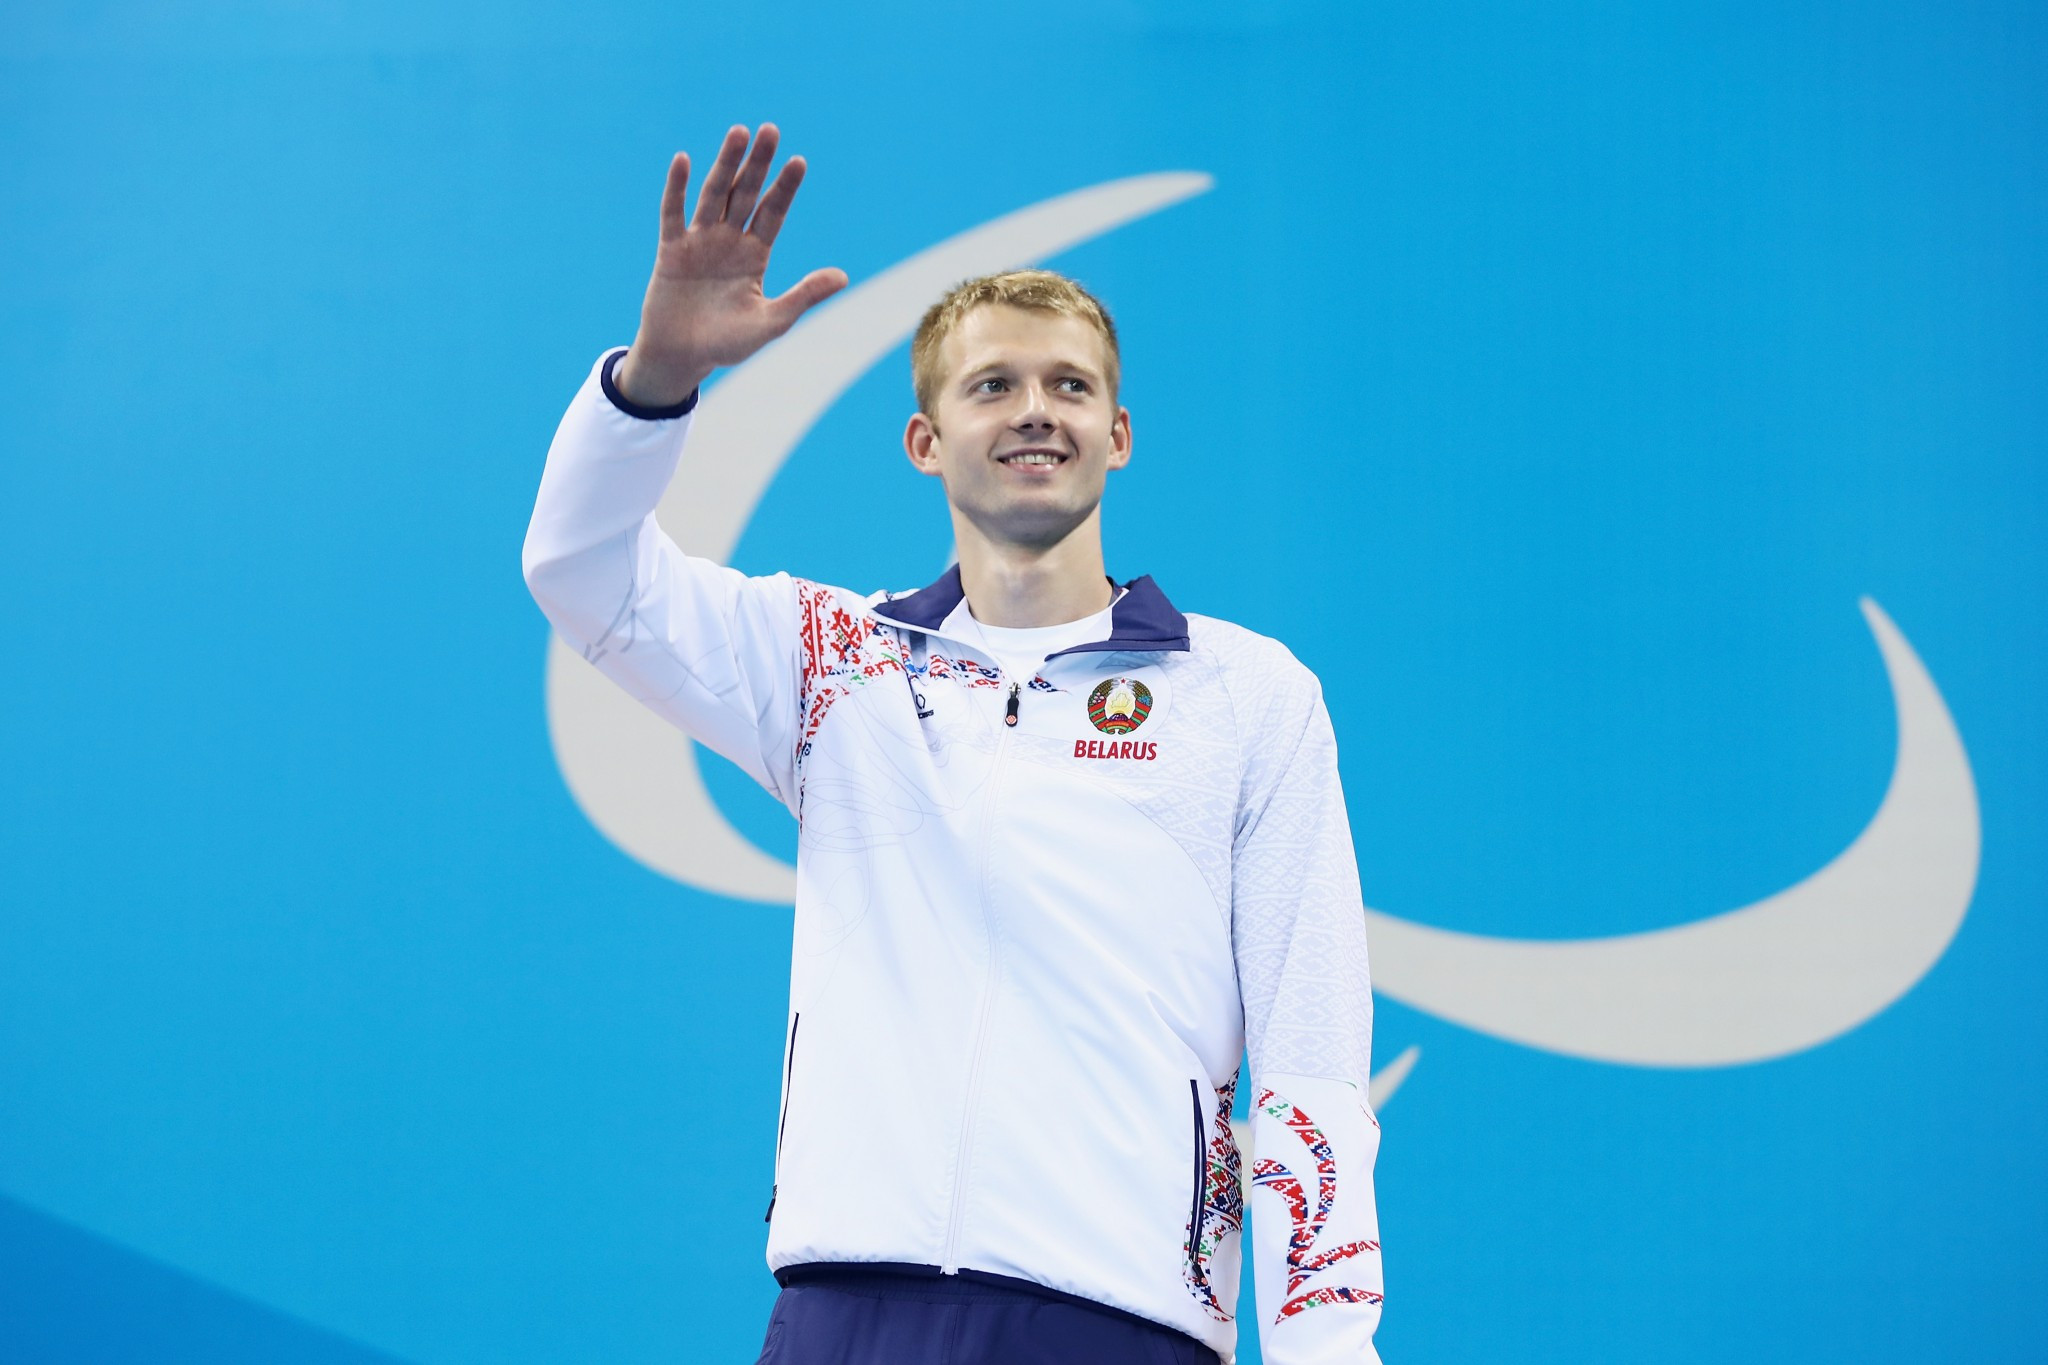 Belarusian swimmer Ihar Boki, who was the most decorated Paralympian at Rio 2016, is among the nominees for the best male category ©Getty Images